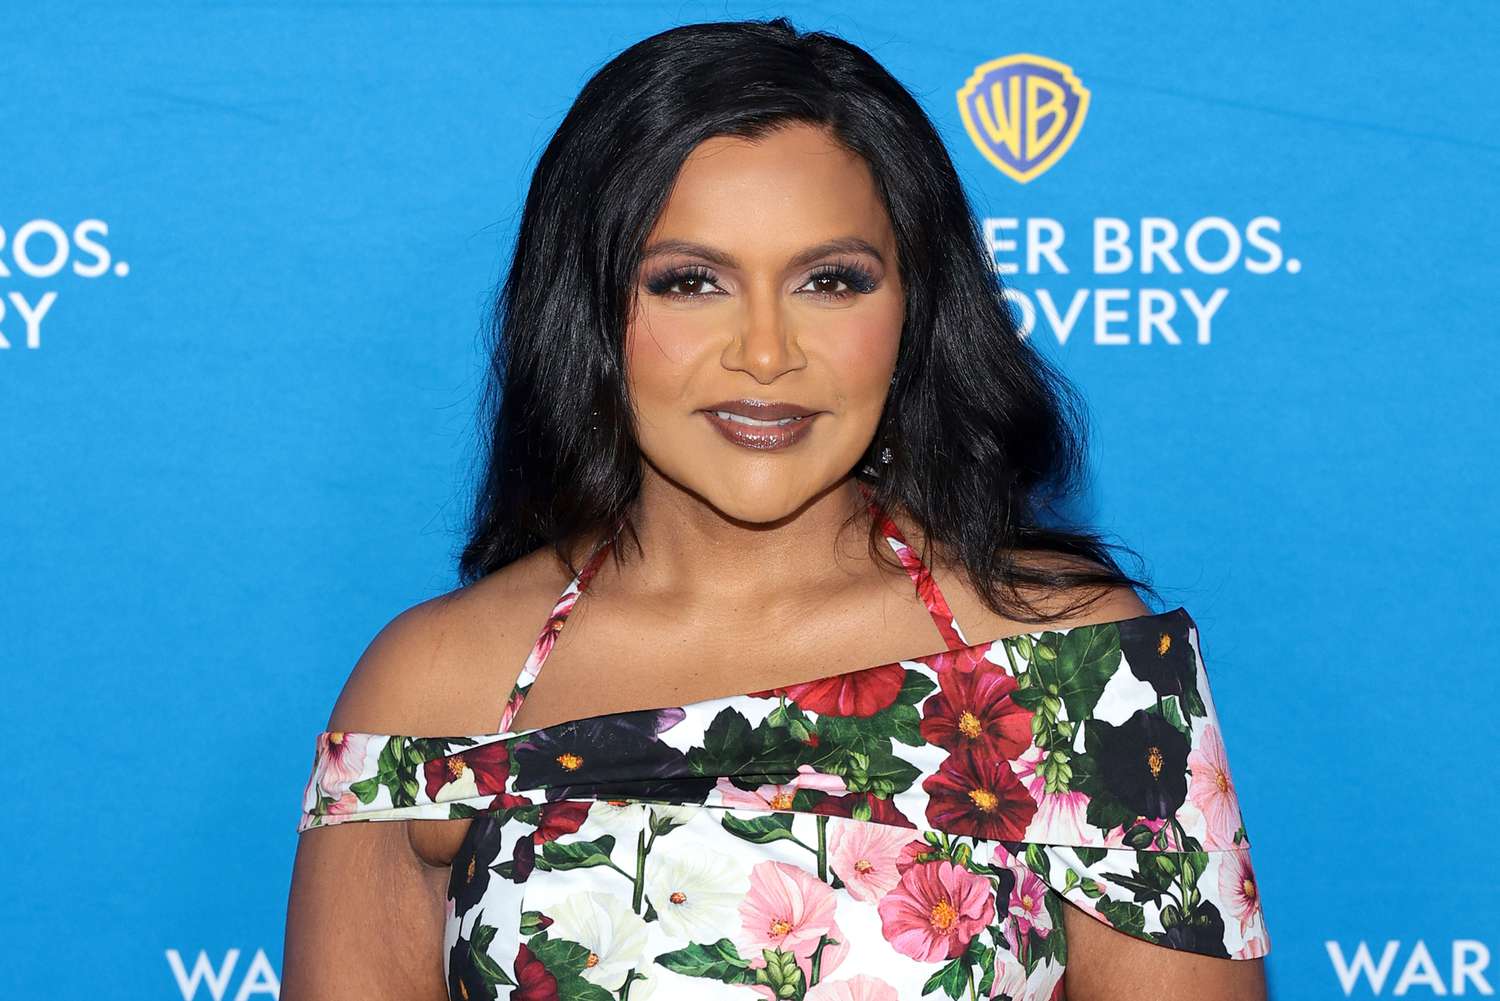 Mindy Kaling has some serious advice for cast of 'The Office' reboot